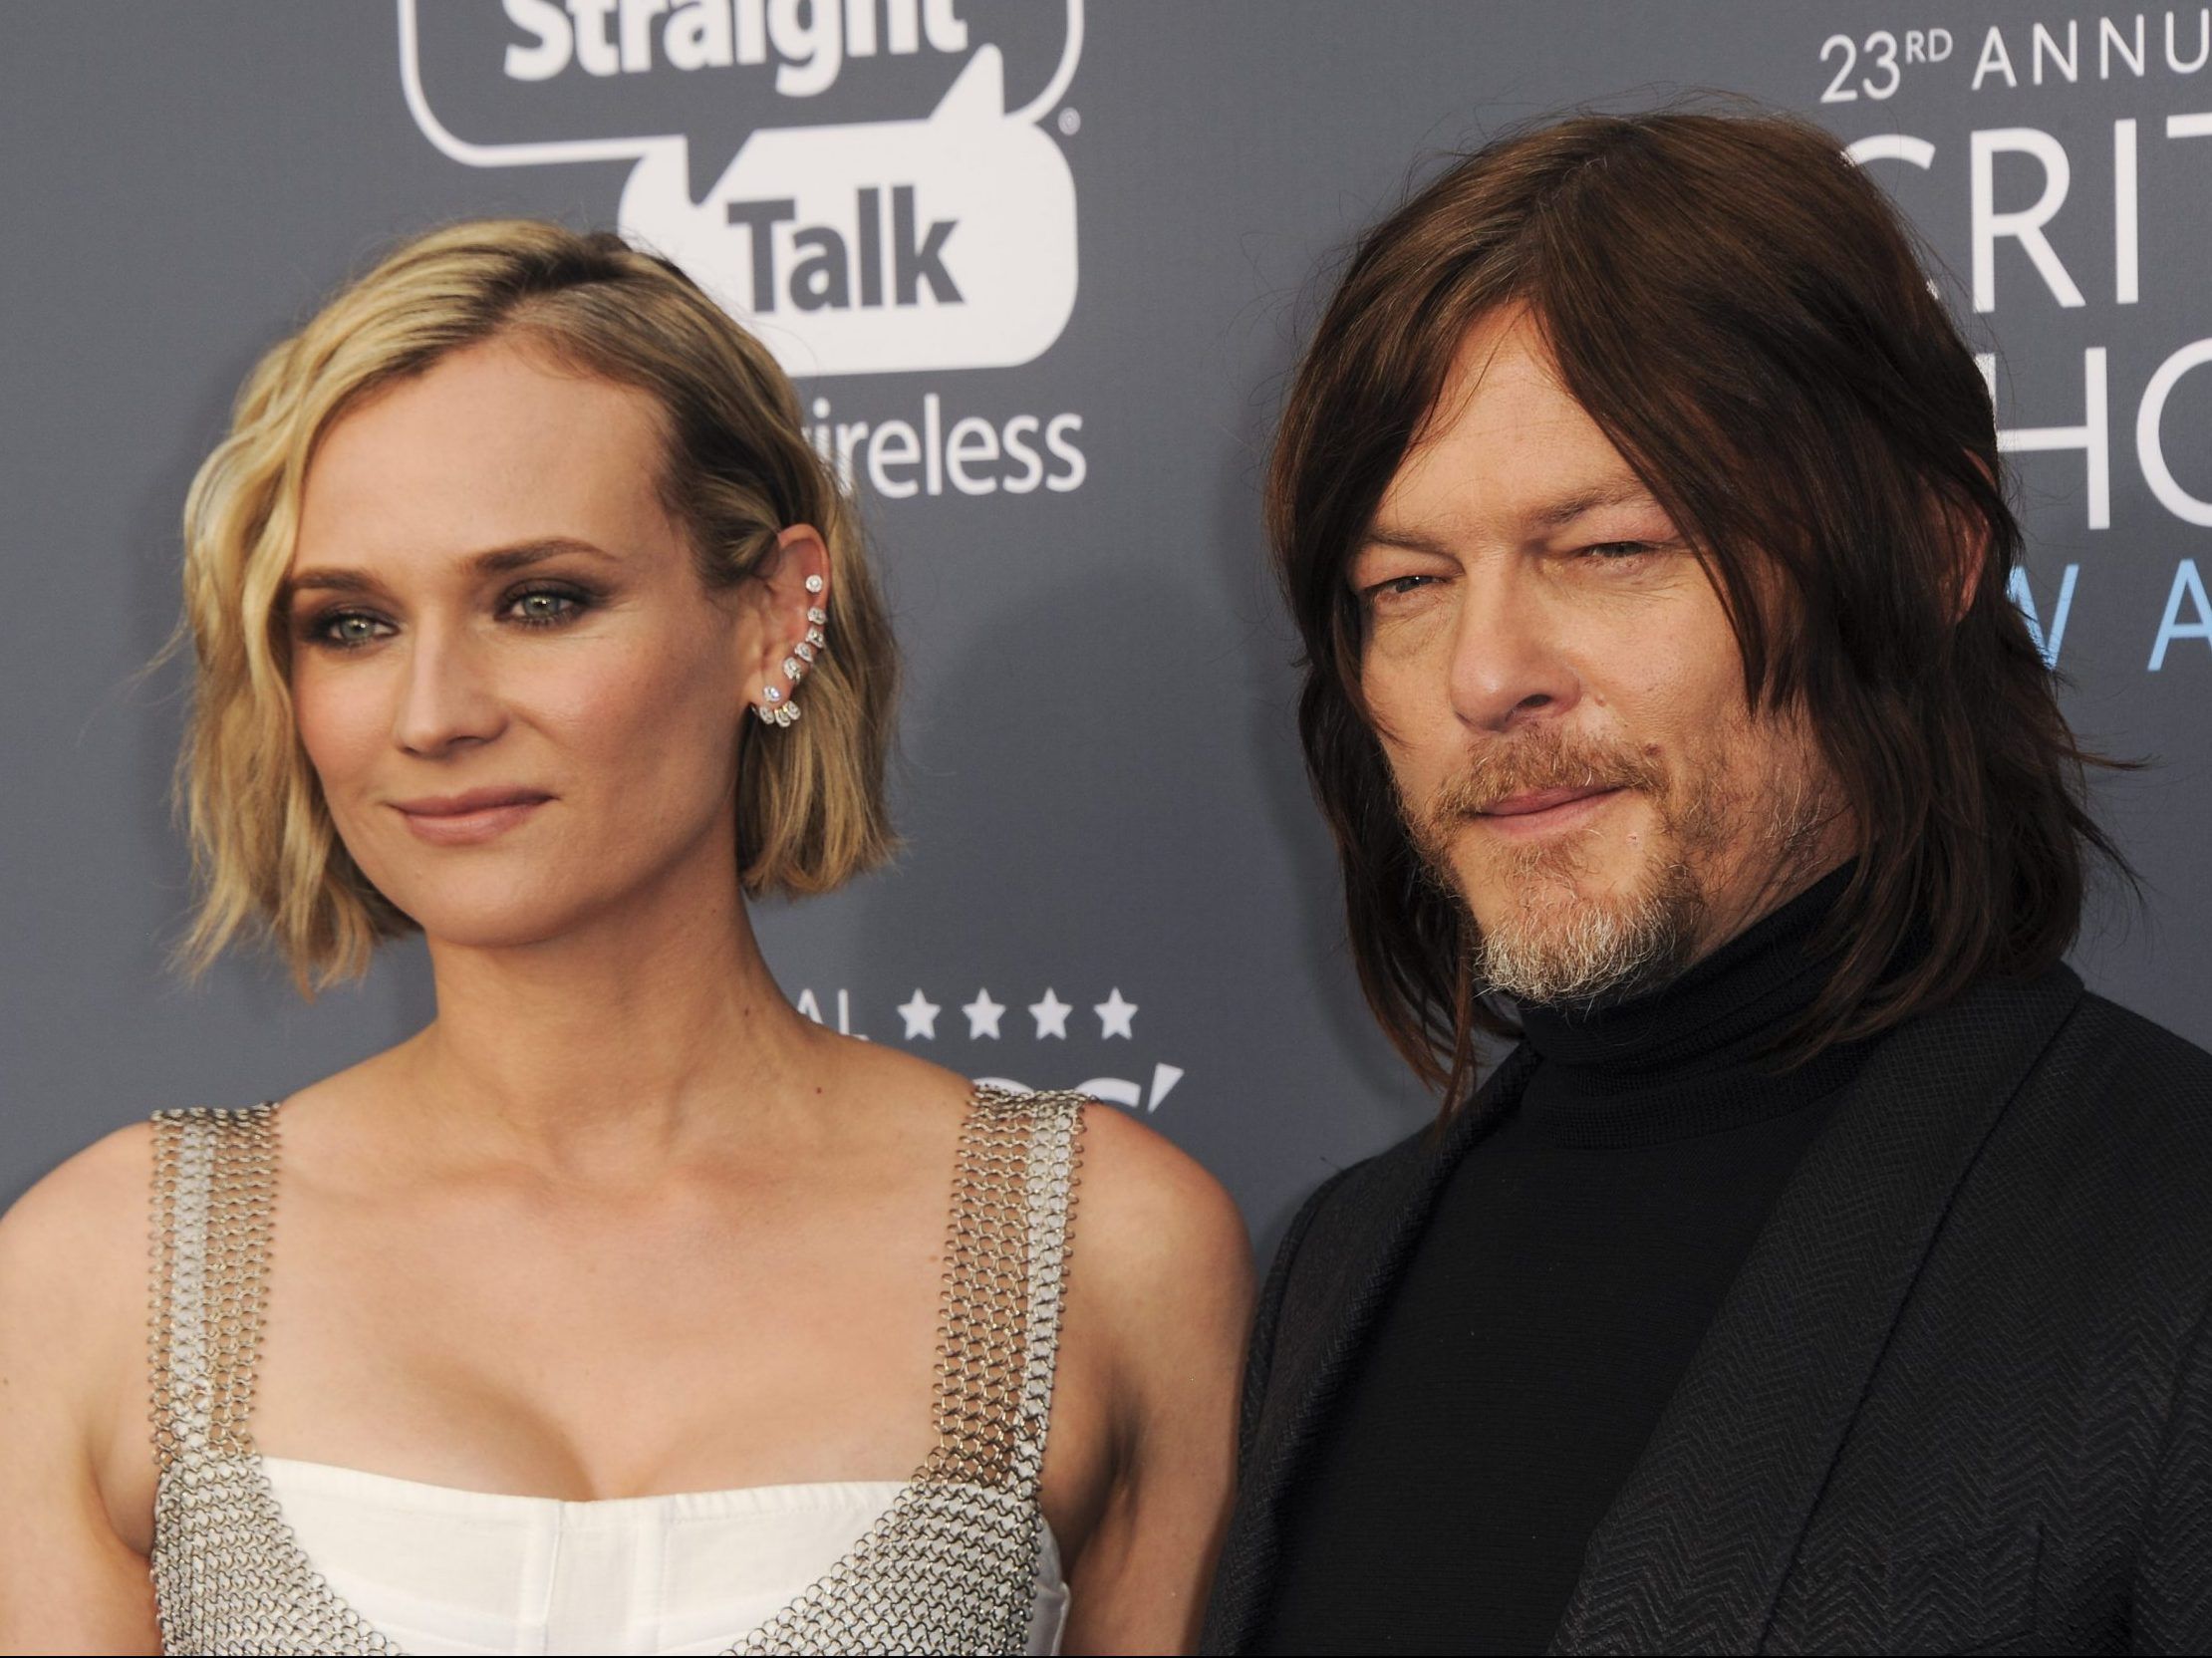 Norman Reedus and Diane Kruger are reportedly engaged